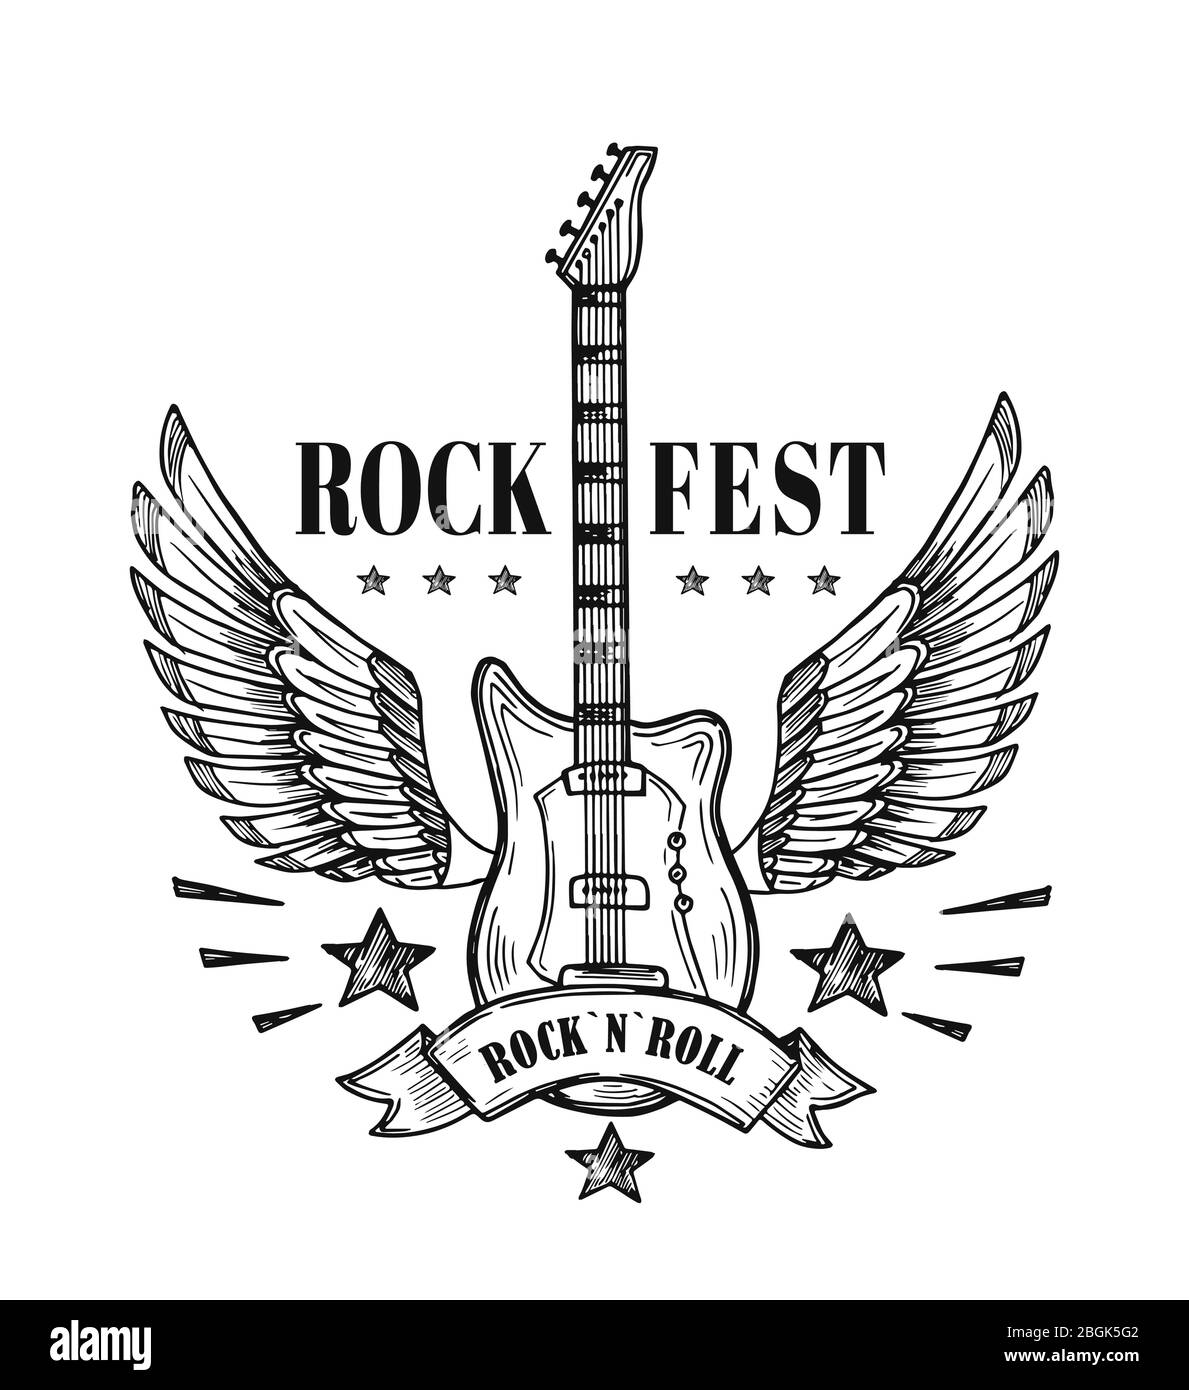 Guitar with wings. Music festival vintage poster. Rock and roll tattoo vector art. Rock guitar, festival music emblem with wings illustration Stock Vector